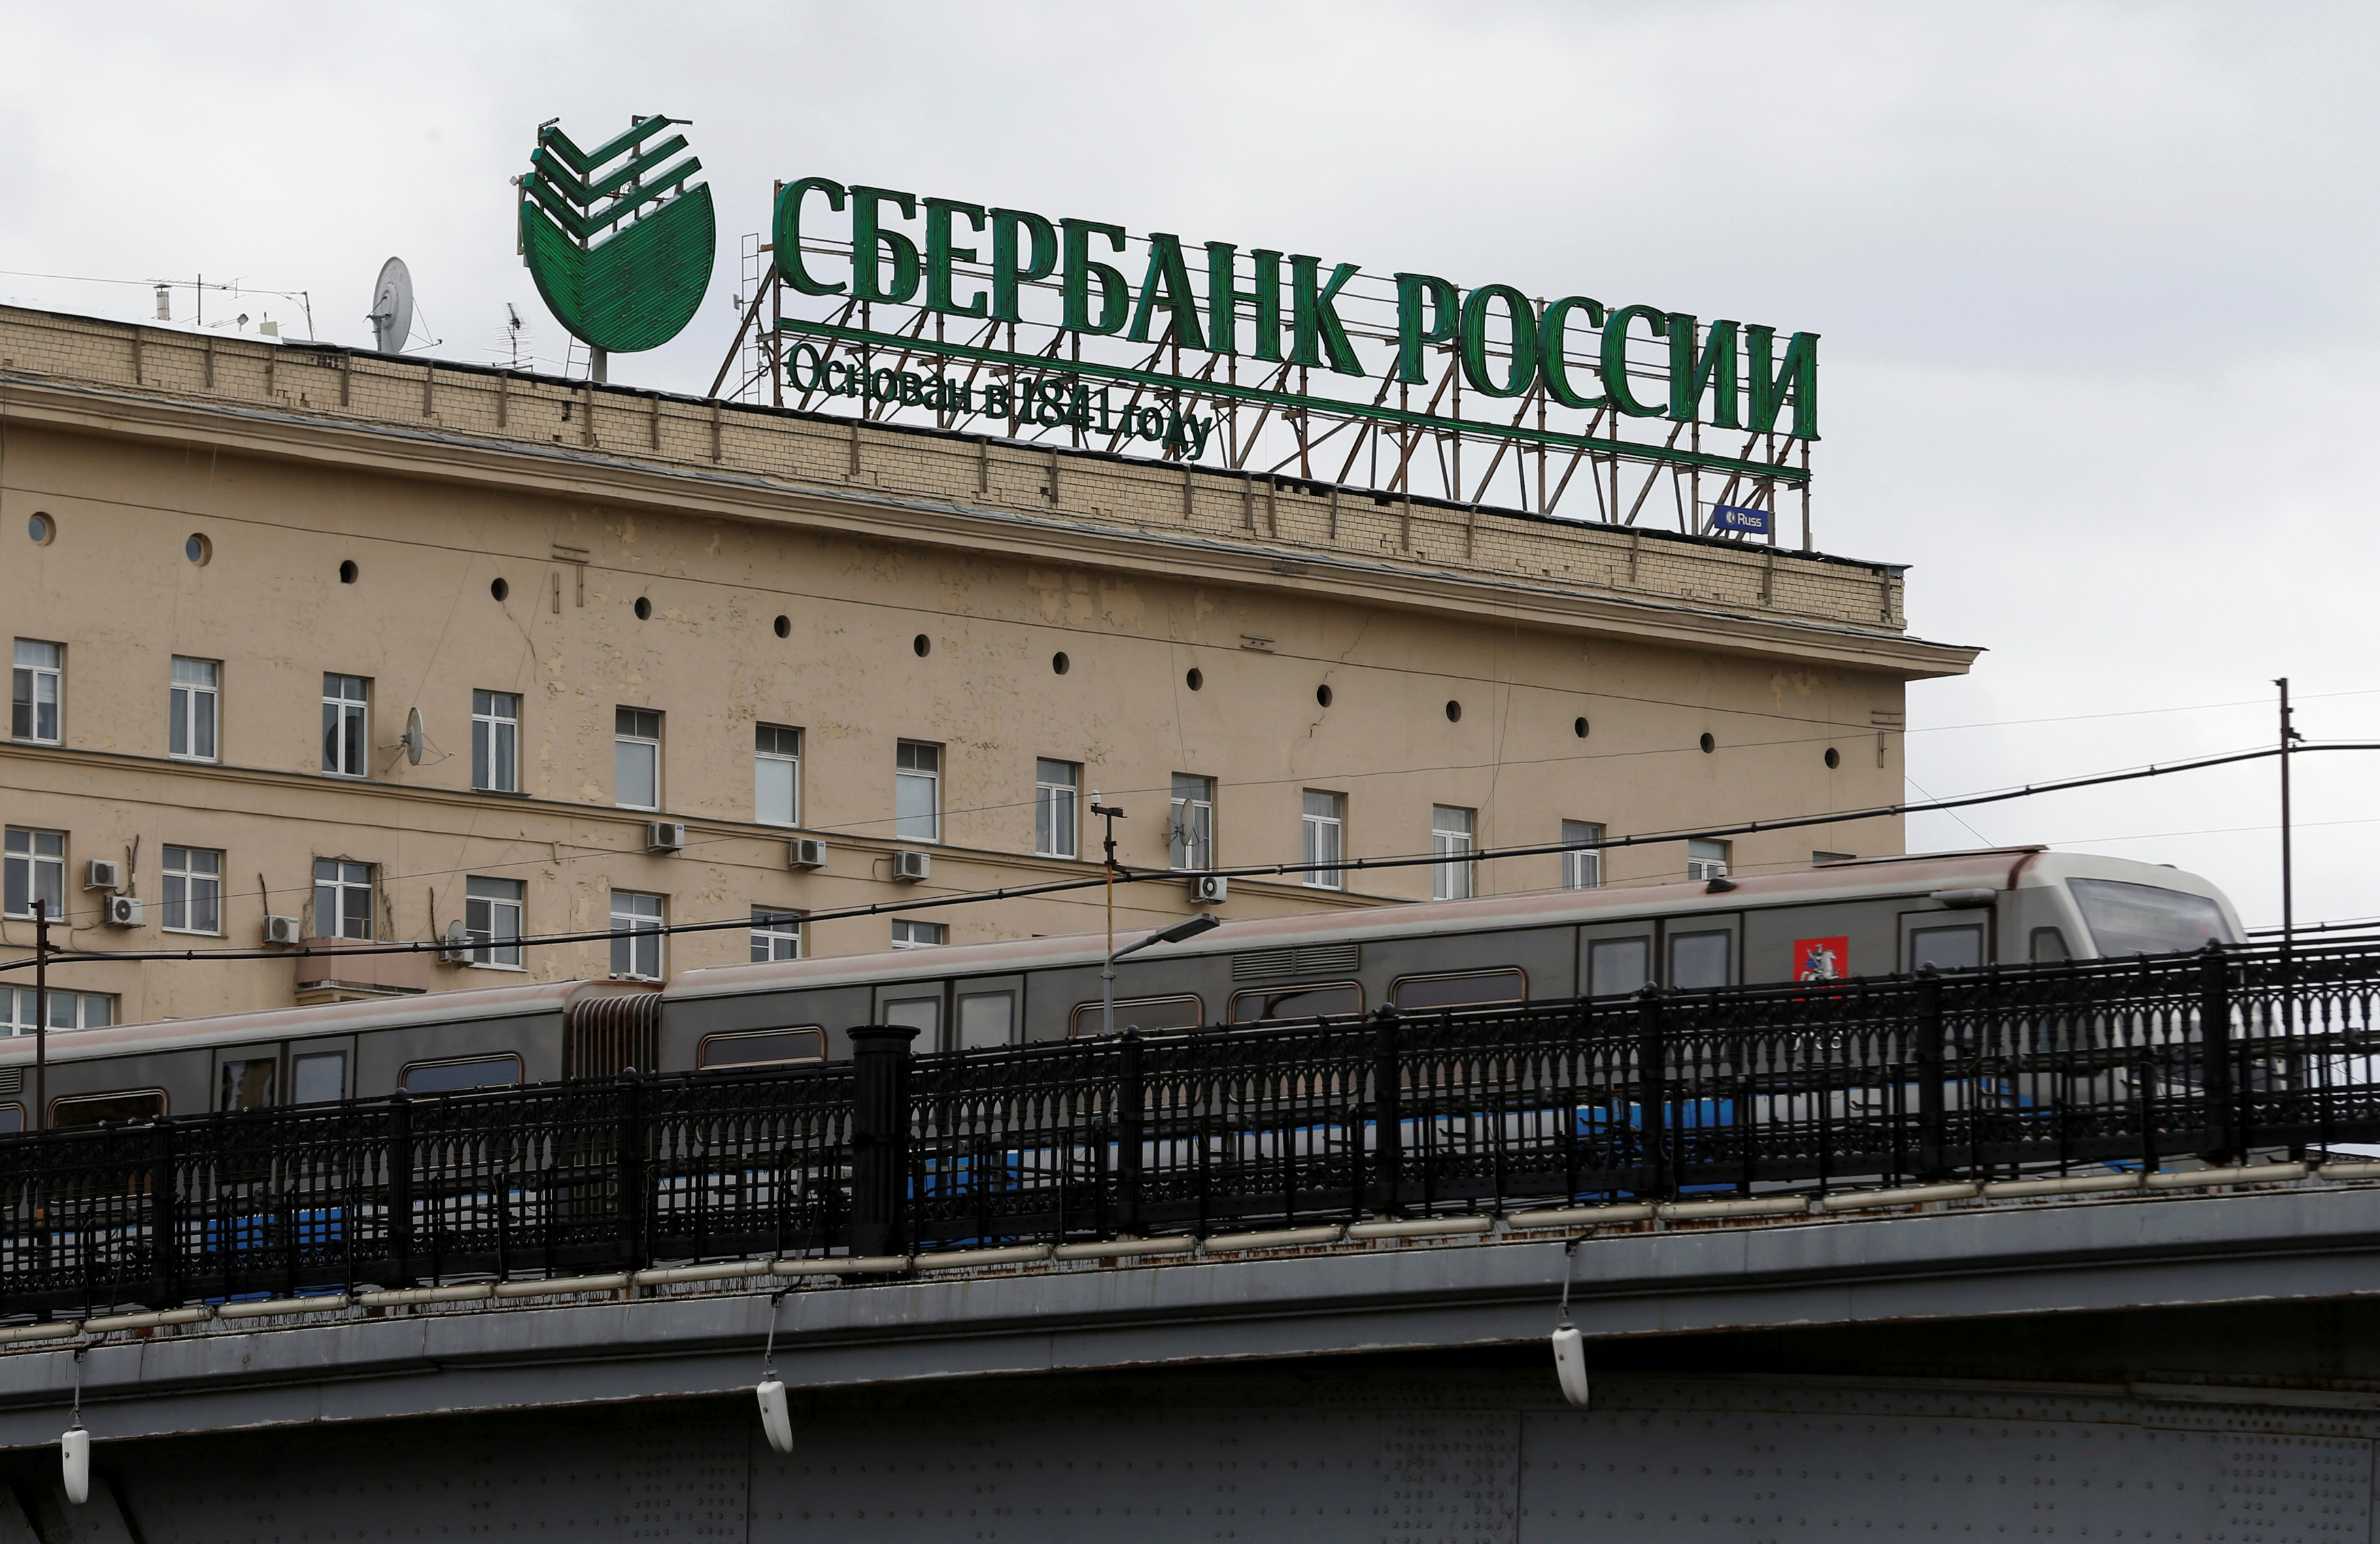 Metro train moves on bridge with logo of Sberbank on top of building seen in background in Moscow